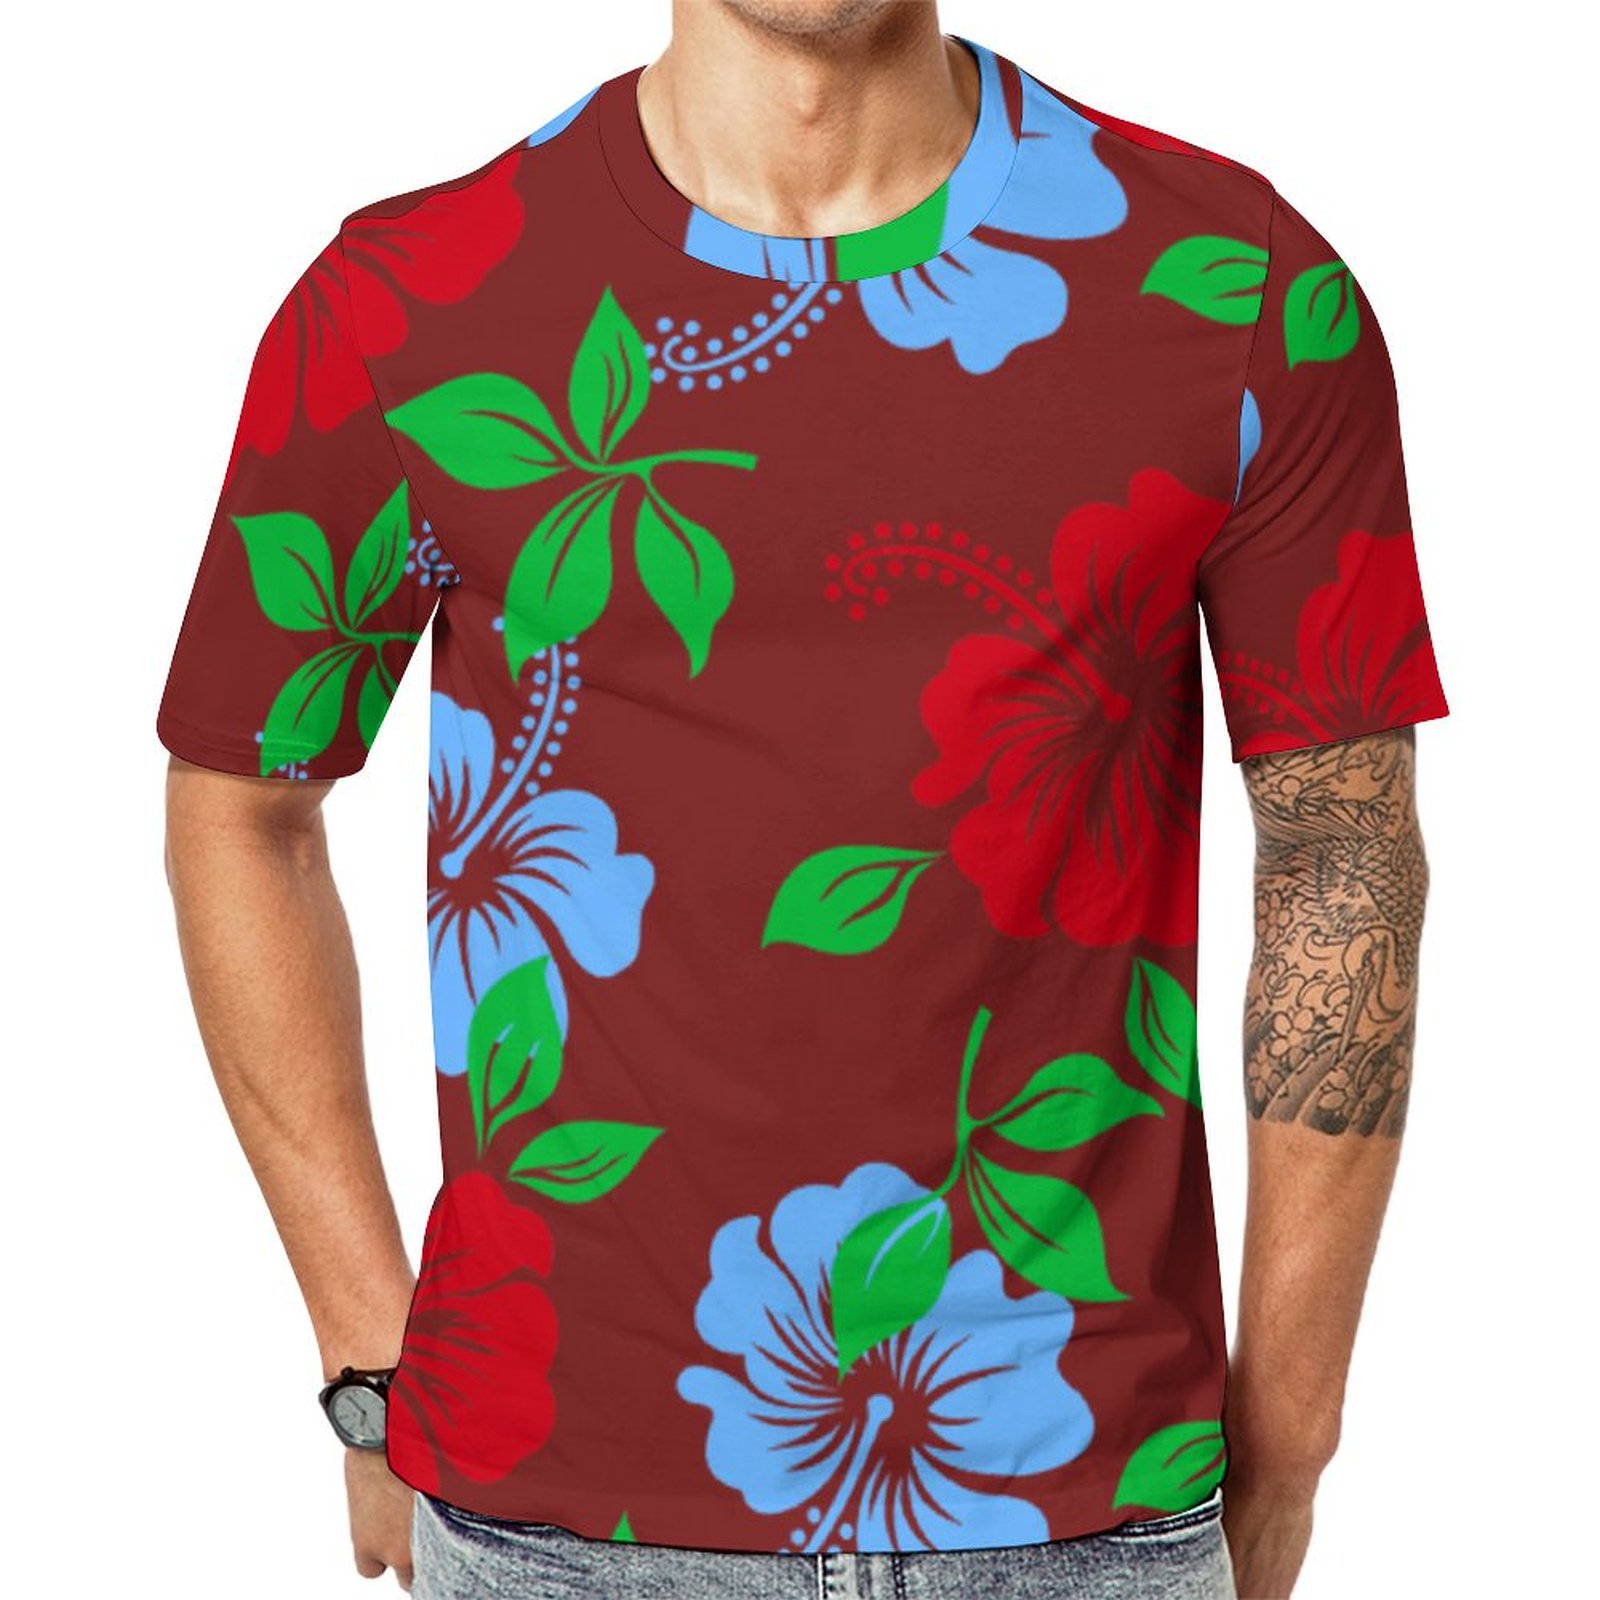 Elegant Blue And Red Tropical Floral Short Sleeve Print Unisex Tshirt Summer Casual Tees for Men and Women Coolcoshirts